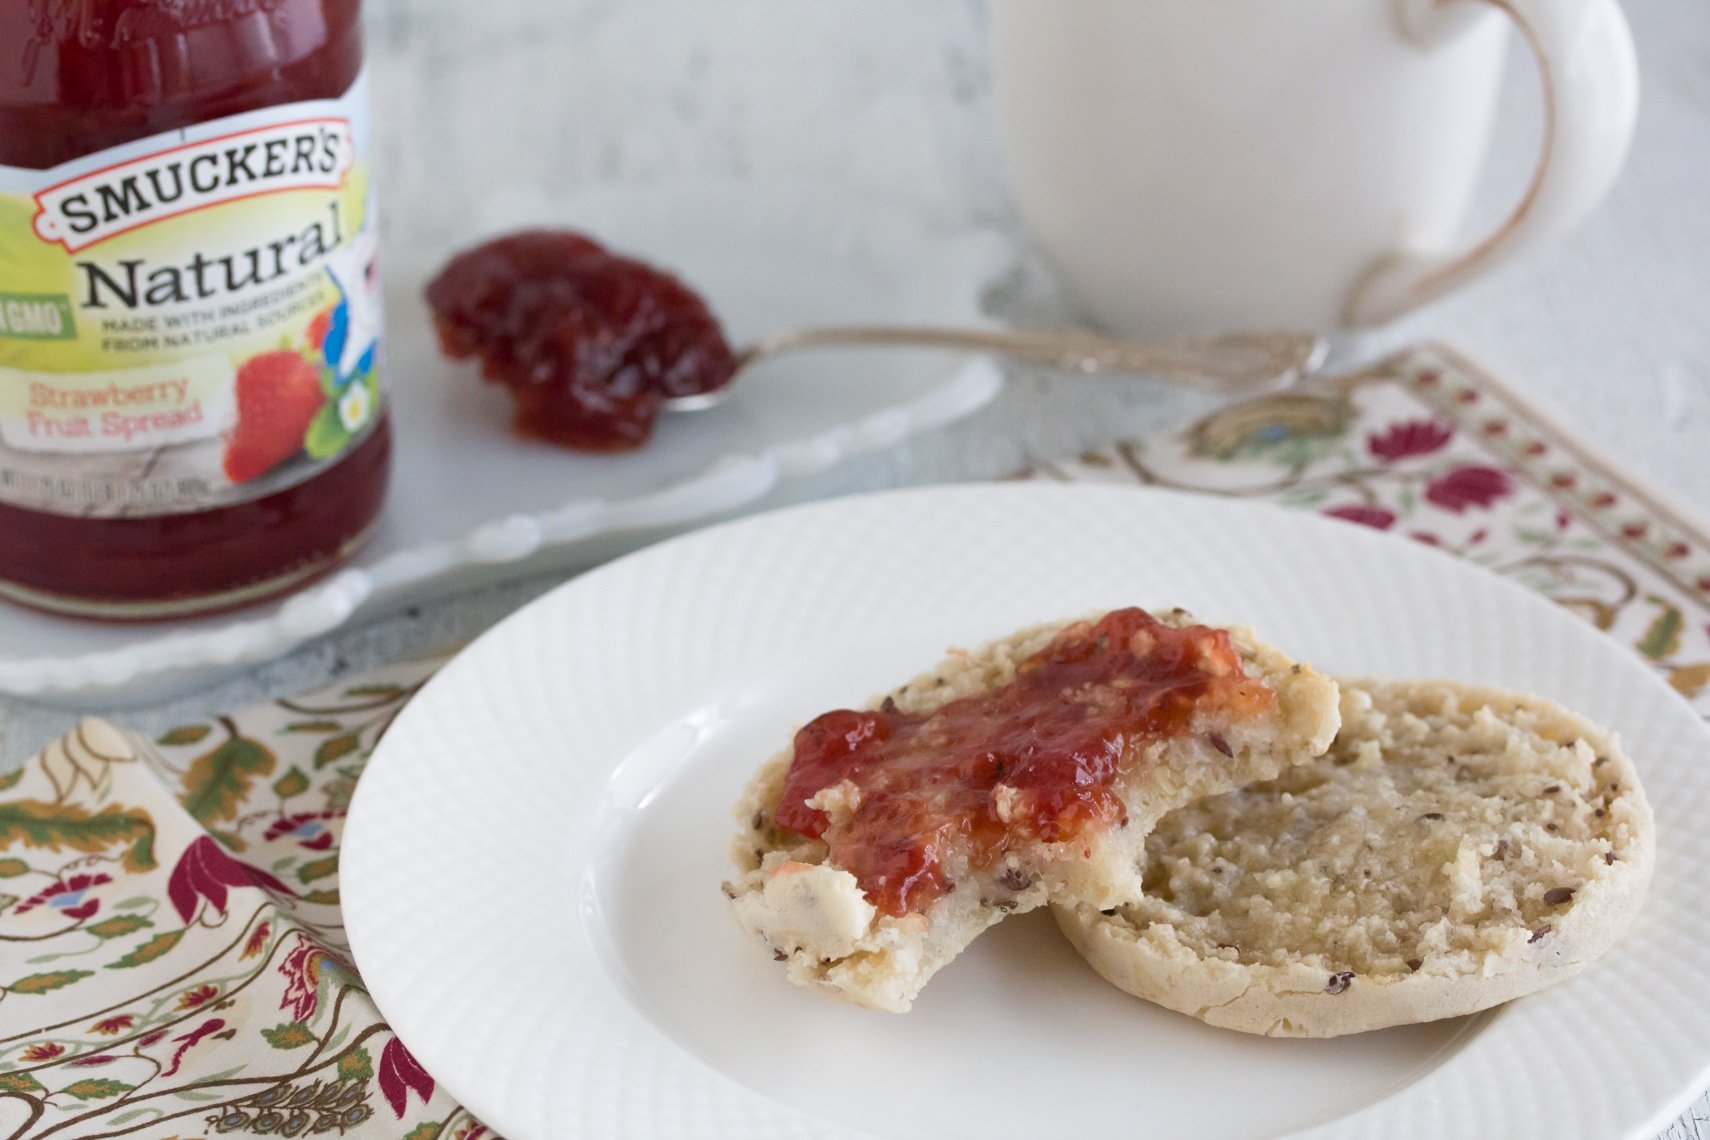 Smucker's Natural Strawberry Fruit Spread on a low FODMAP English muffin on a white plate